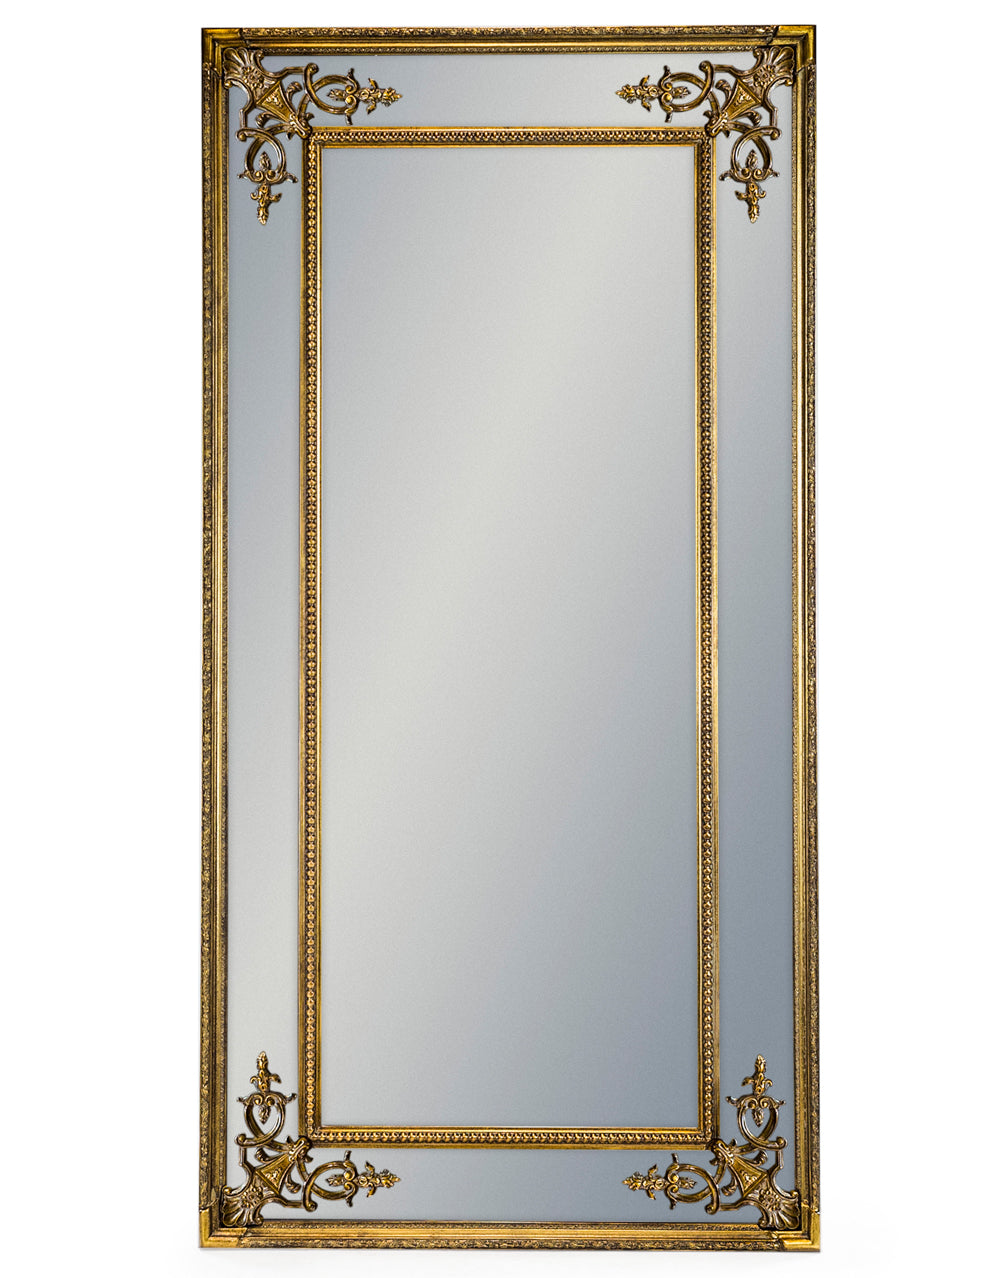 Tall Gold French Mirror without Crest